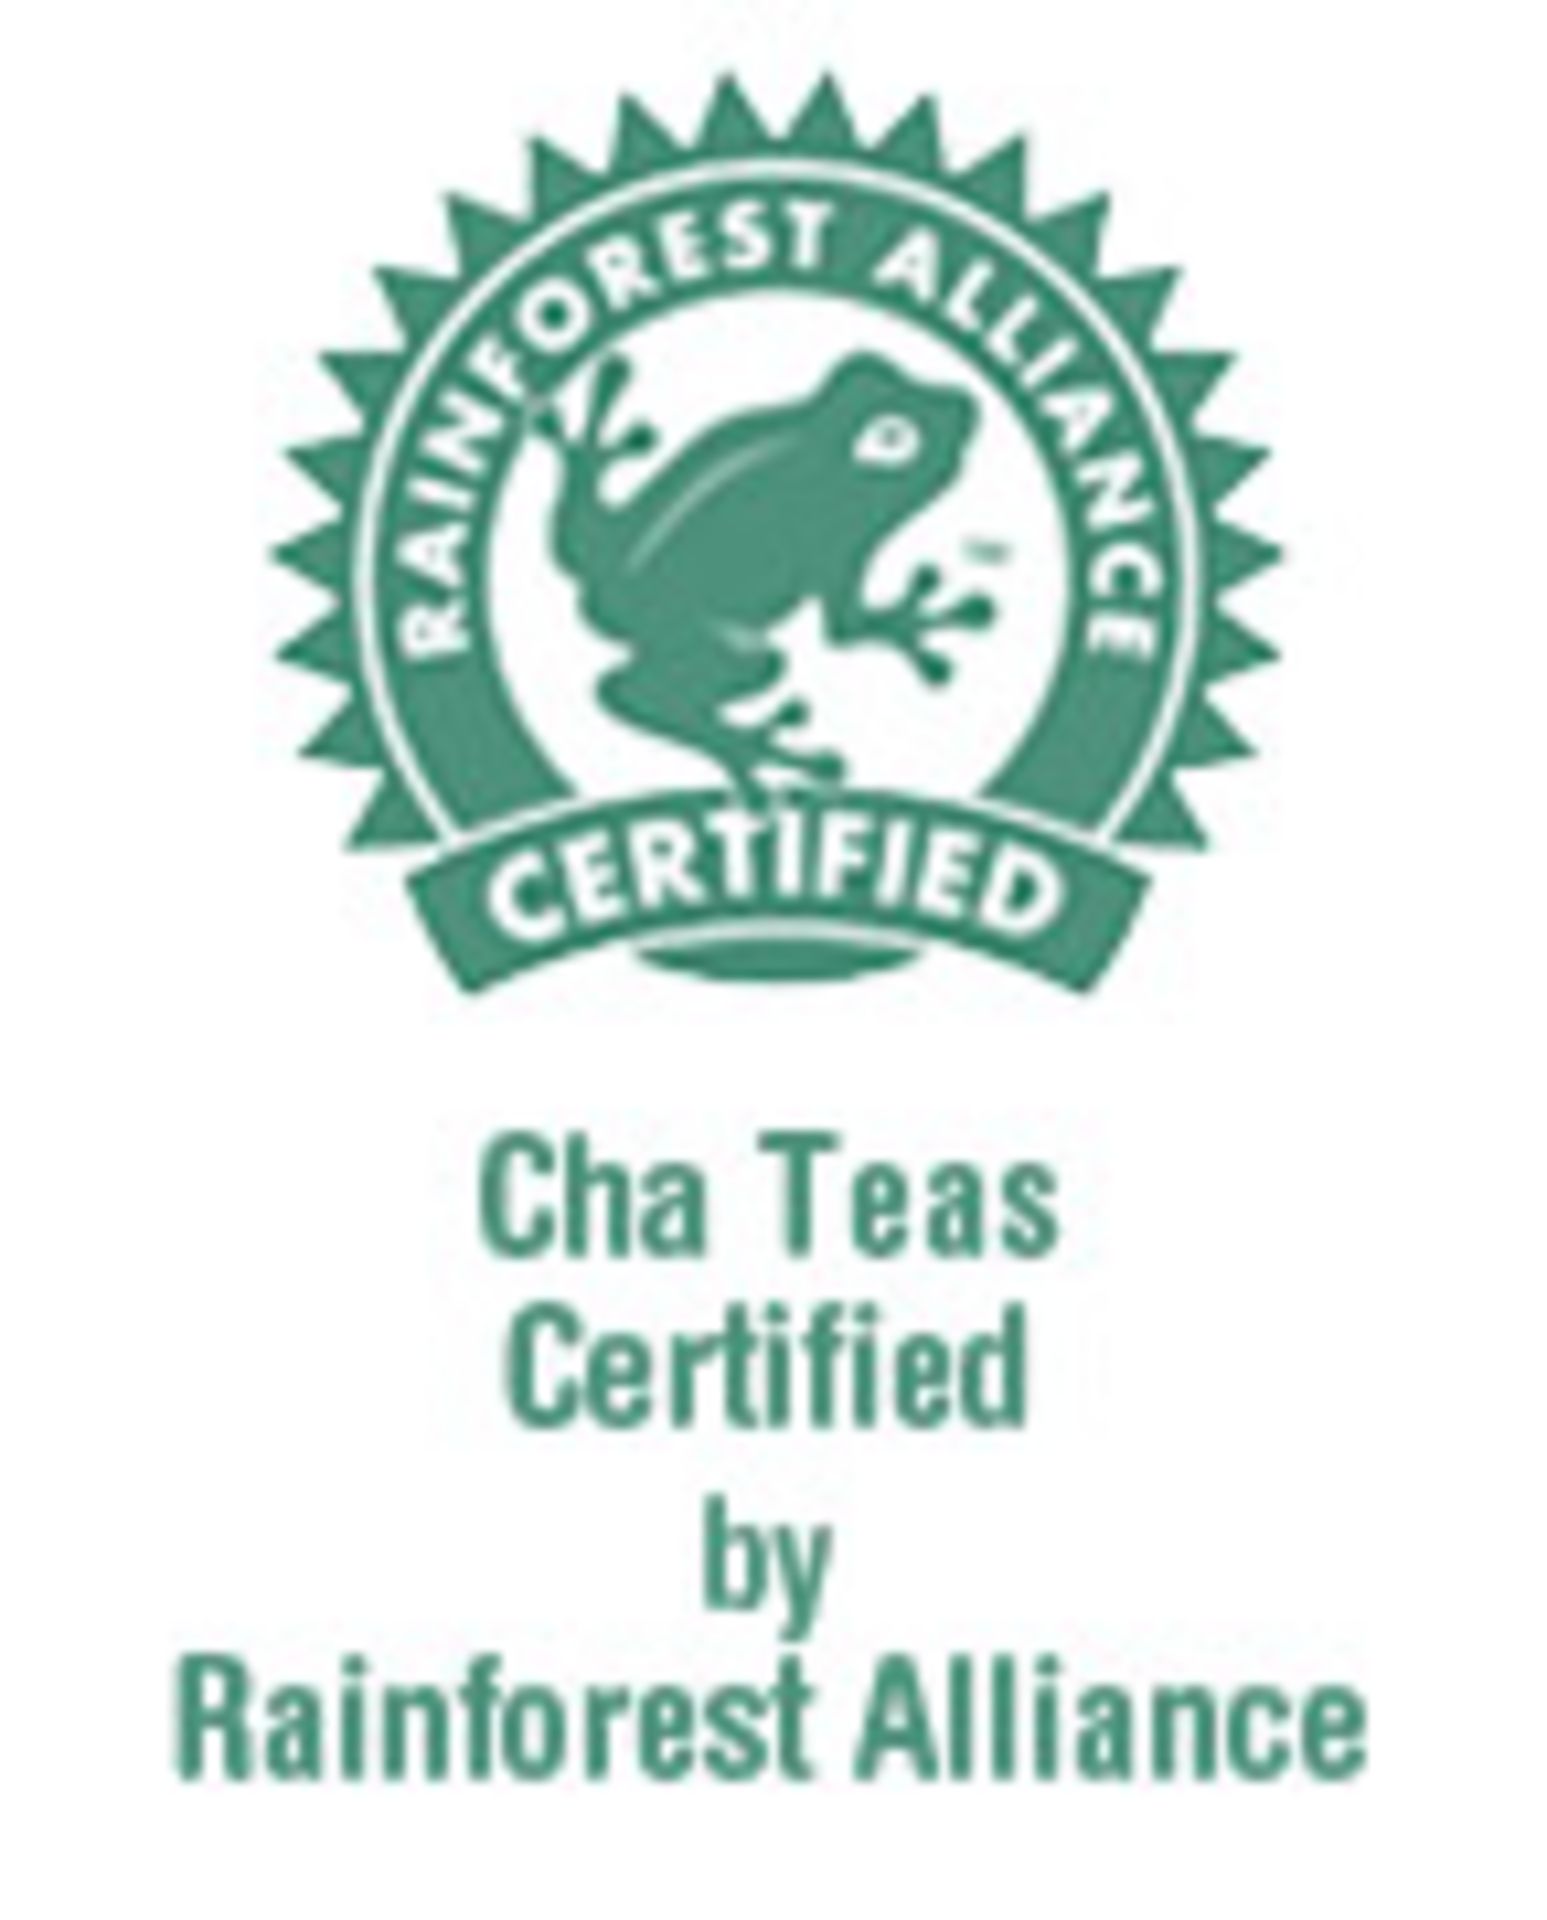 Resale Pallet - 360 x Tins of CHA Organic Tea - PURE BLACK, GOLDEN MANGE AND PURE GREEN - 100% - Image 3 of 6